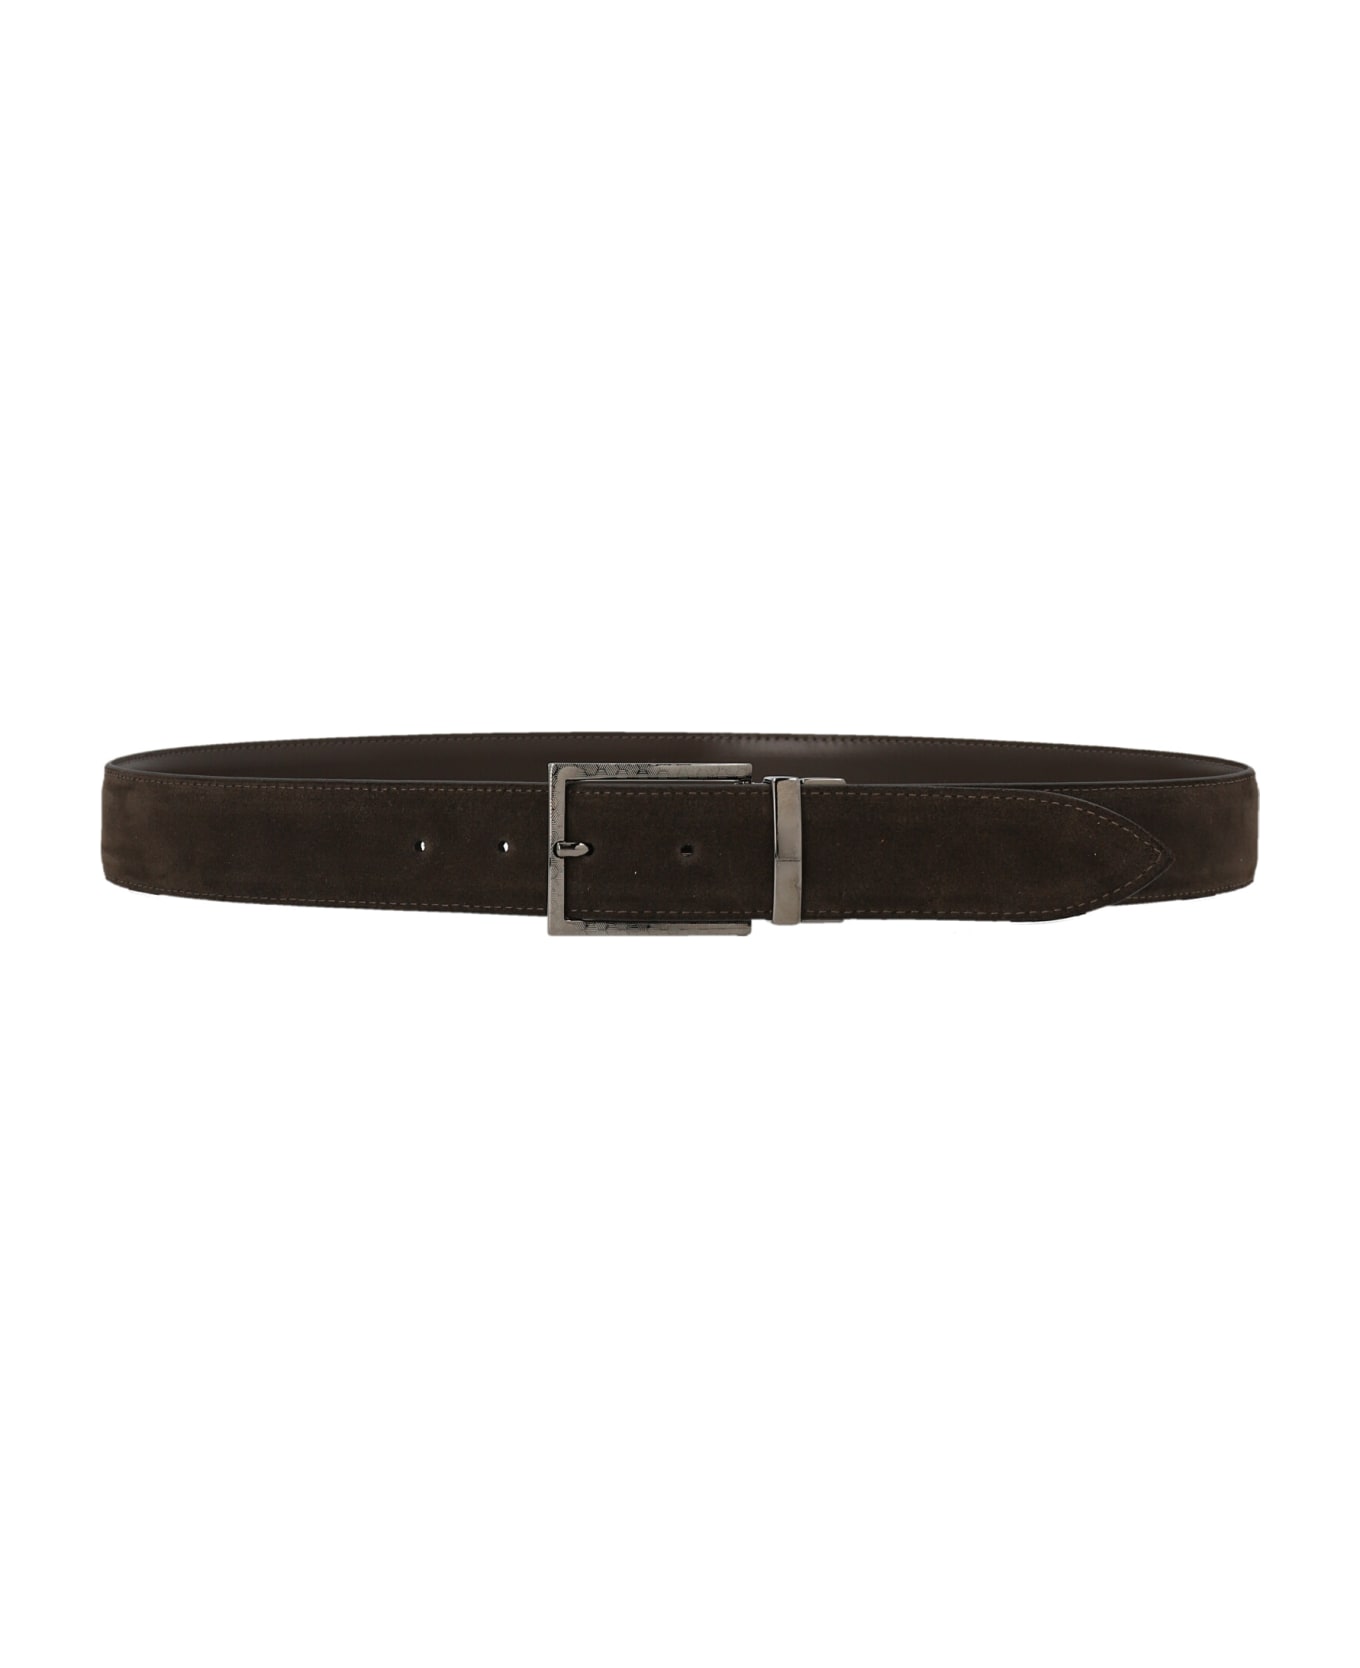 D'Amico Reversible Suede Leather Belt - Brown